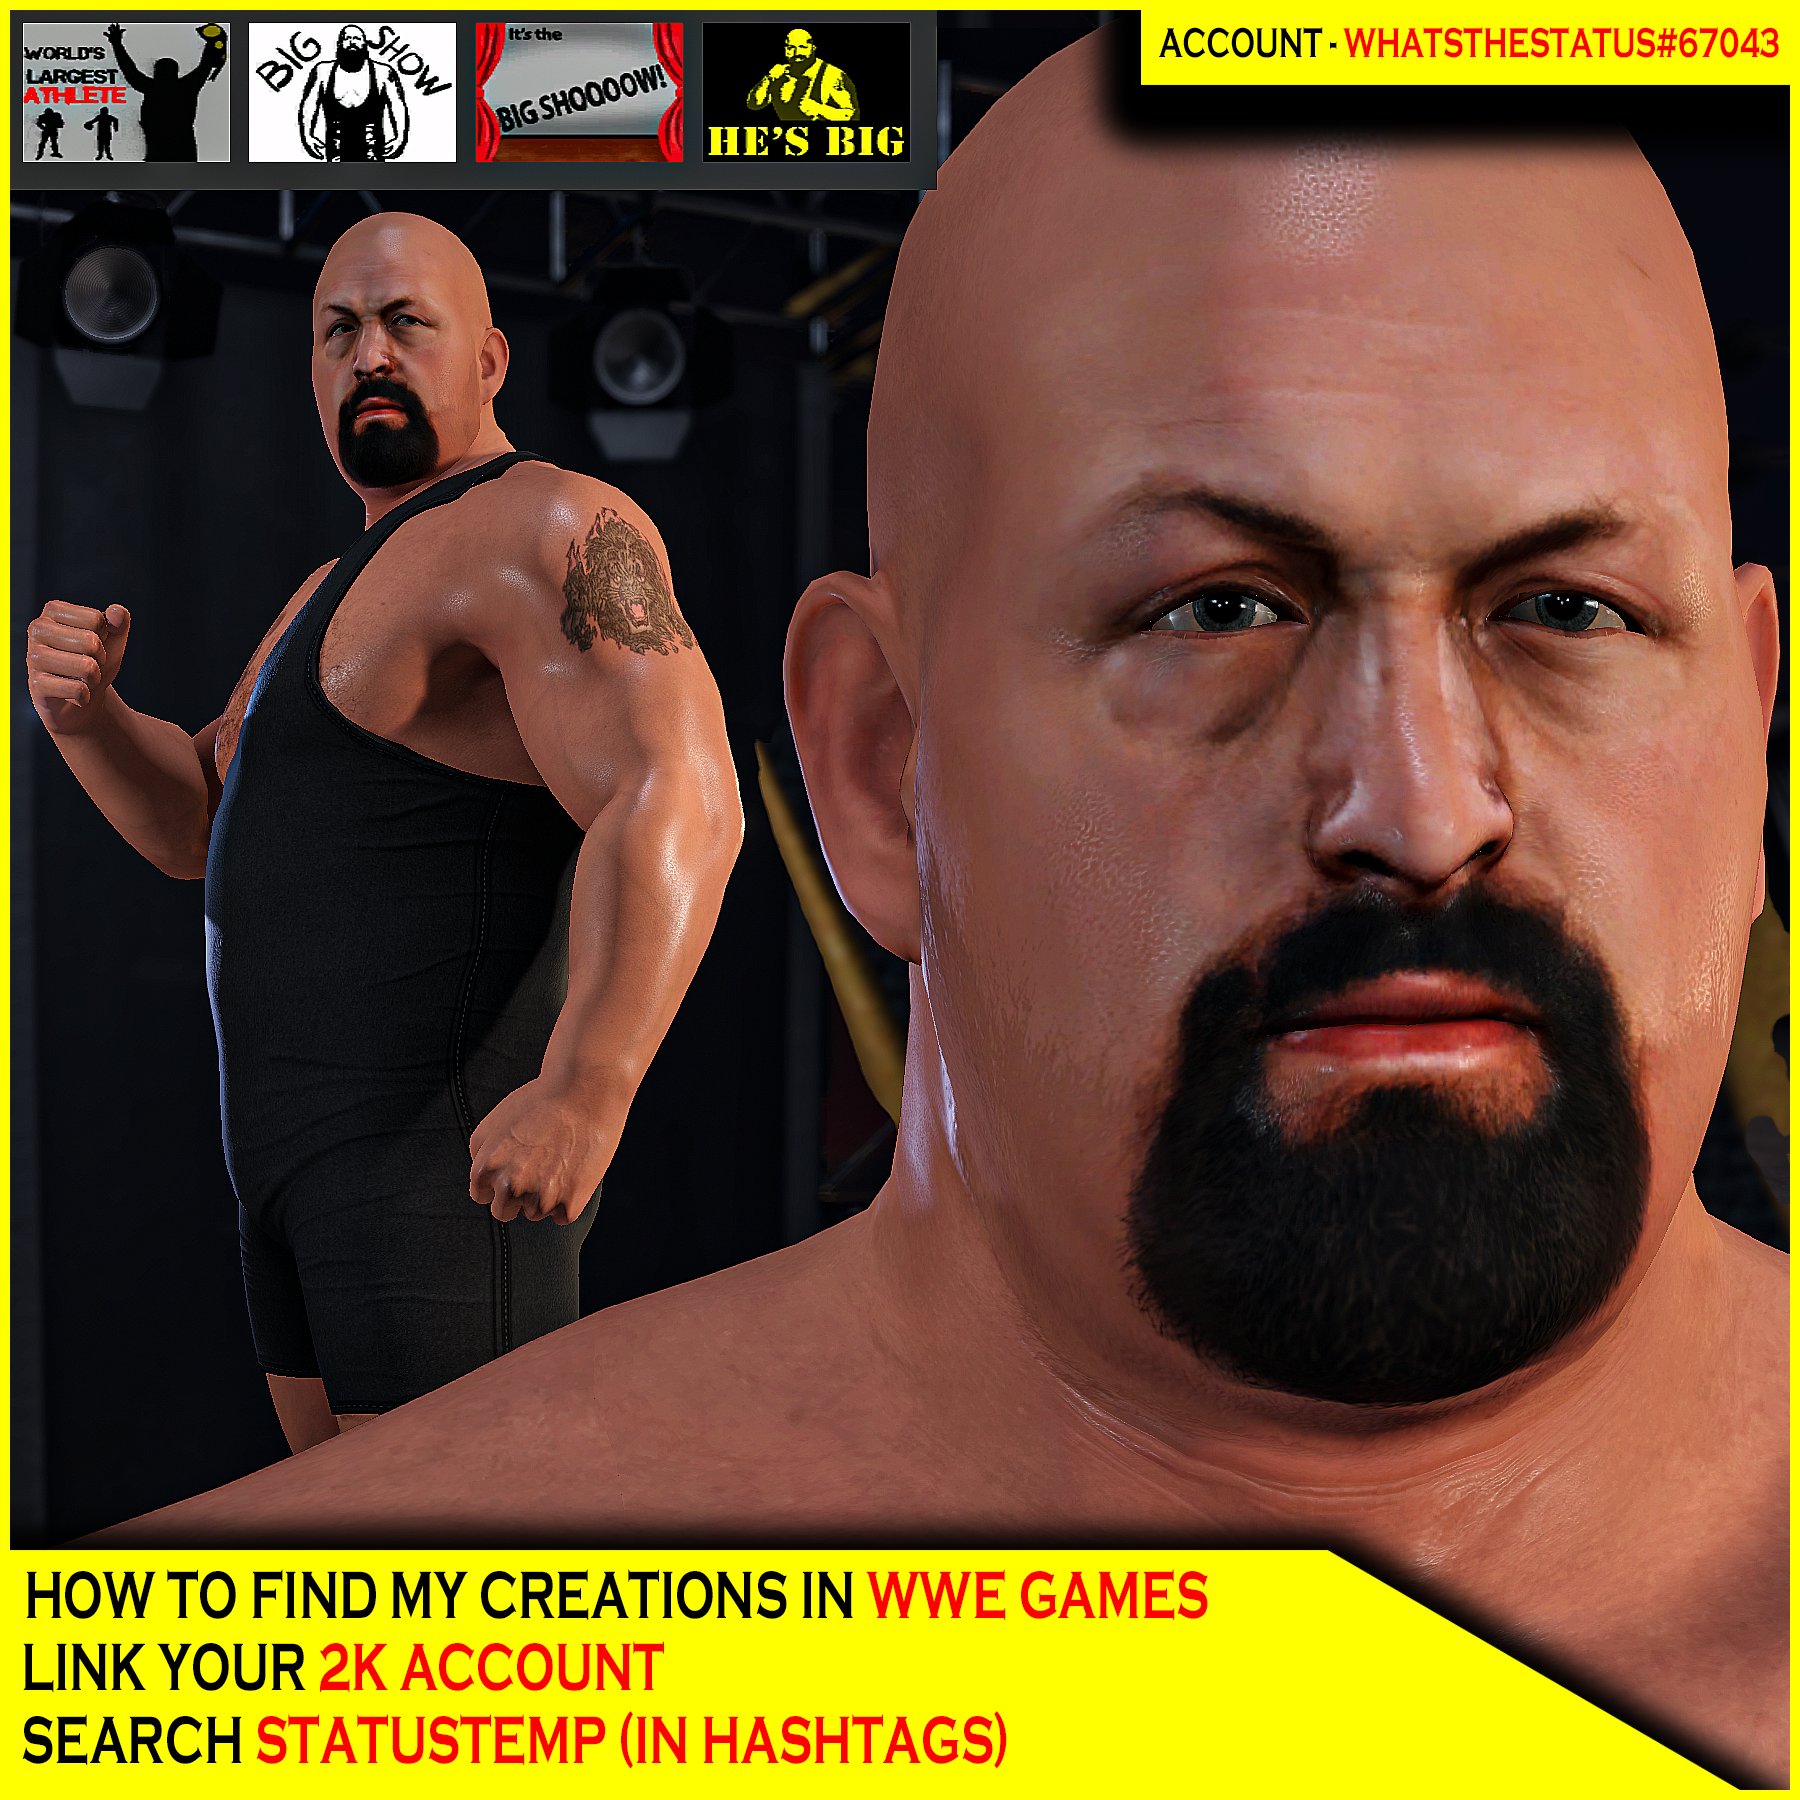 𝕾𝖙𝖆𝖙𝖚𝖘™ on X: Big Show '08 NOW AVAILABLE IN #WWE2K22 ◇ Hidden Crowd  Signs Included. ◇ Height Mod to Match Andre The giant Size. ◇ Search  STATUSTEMP226  / X